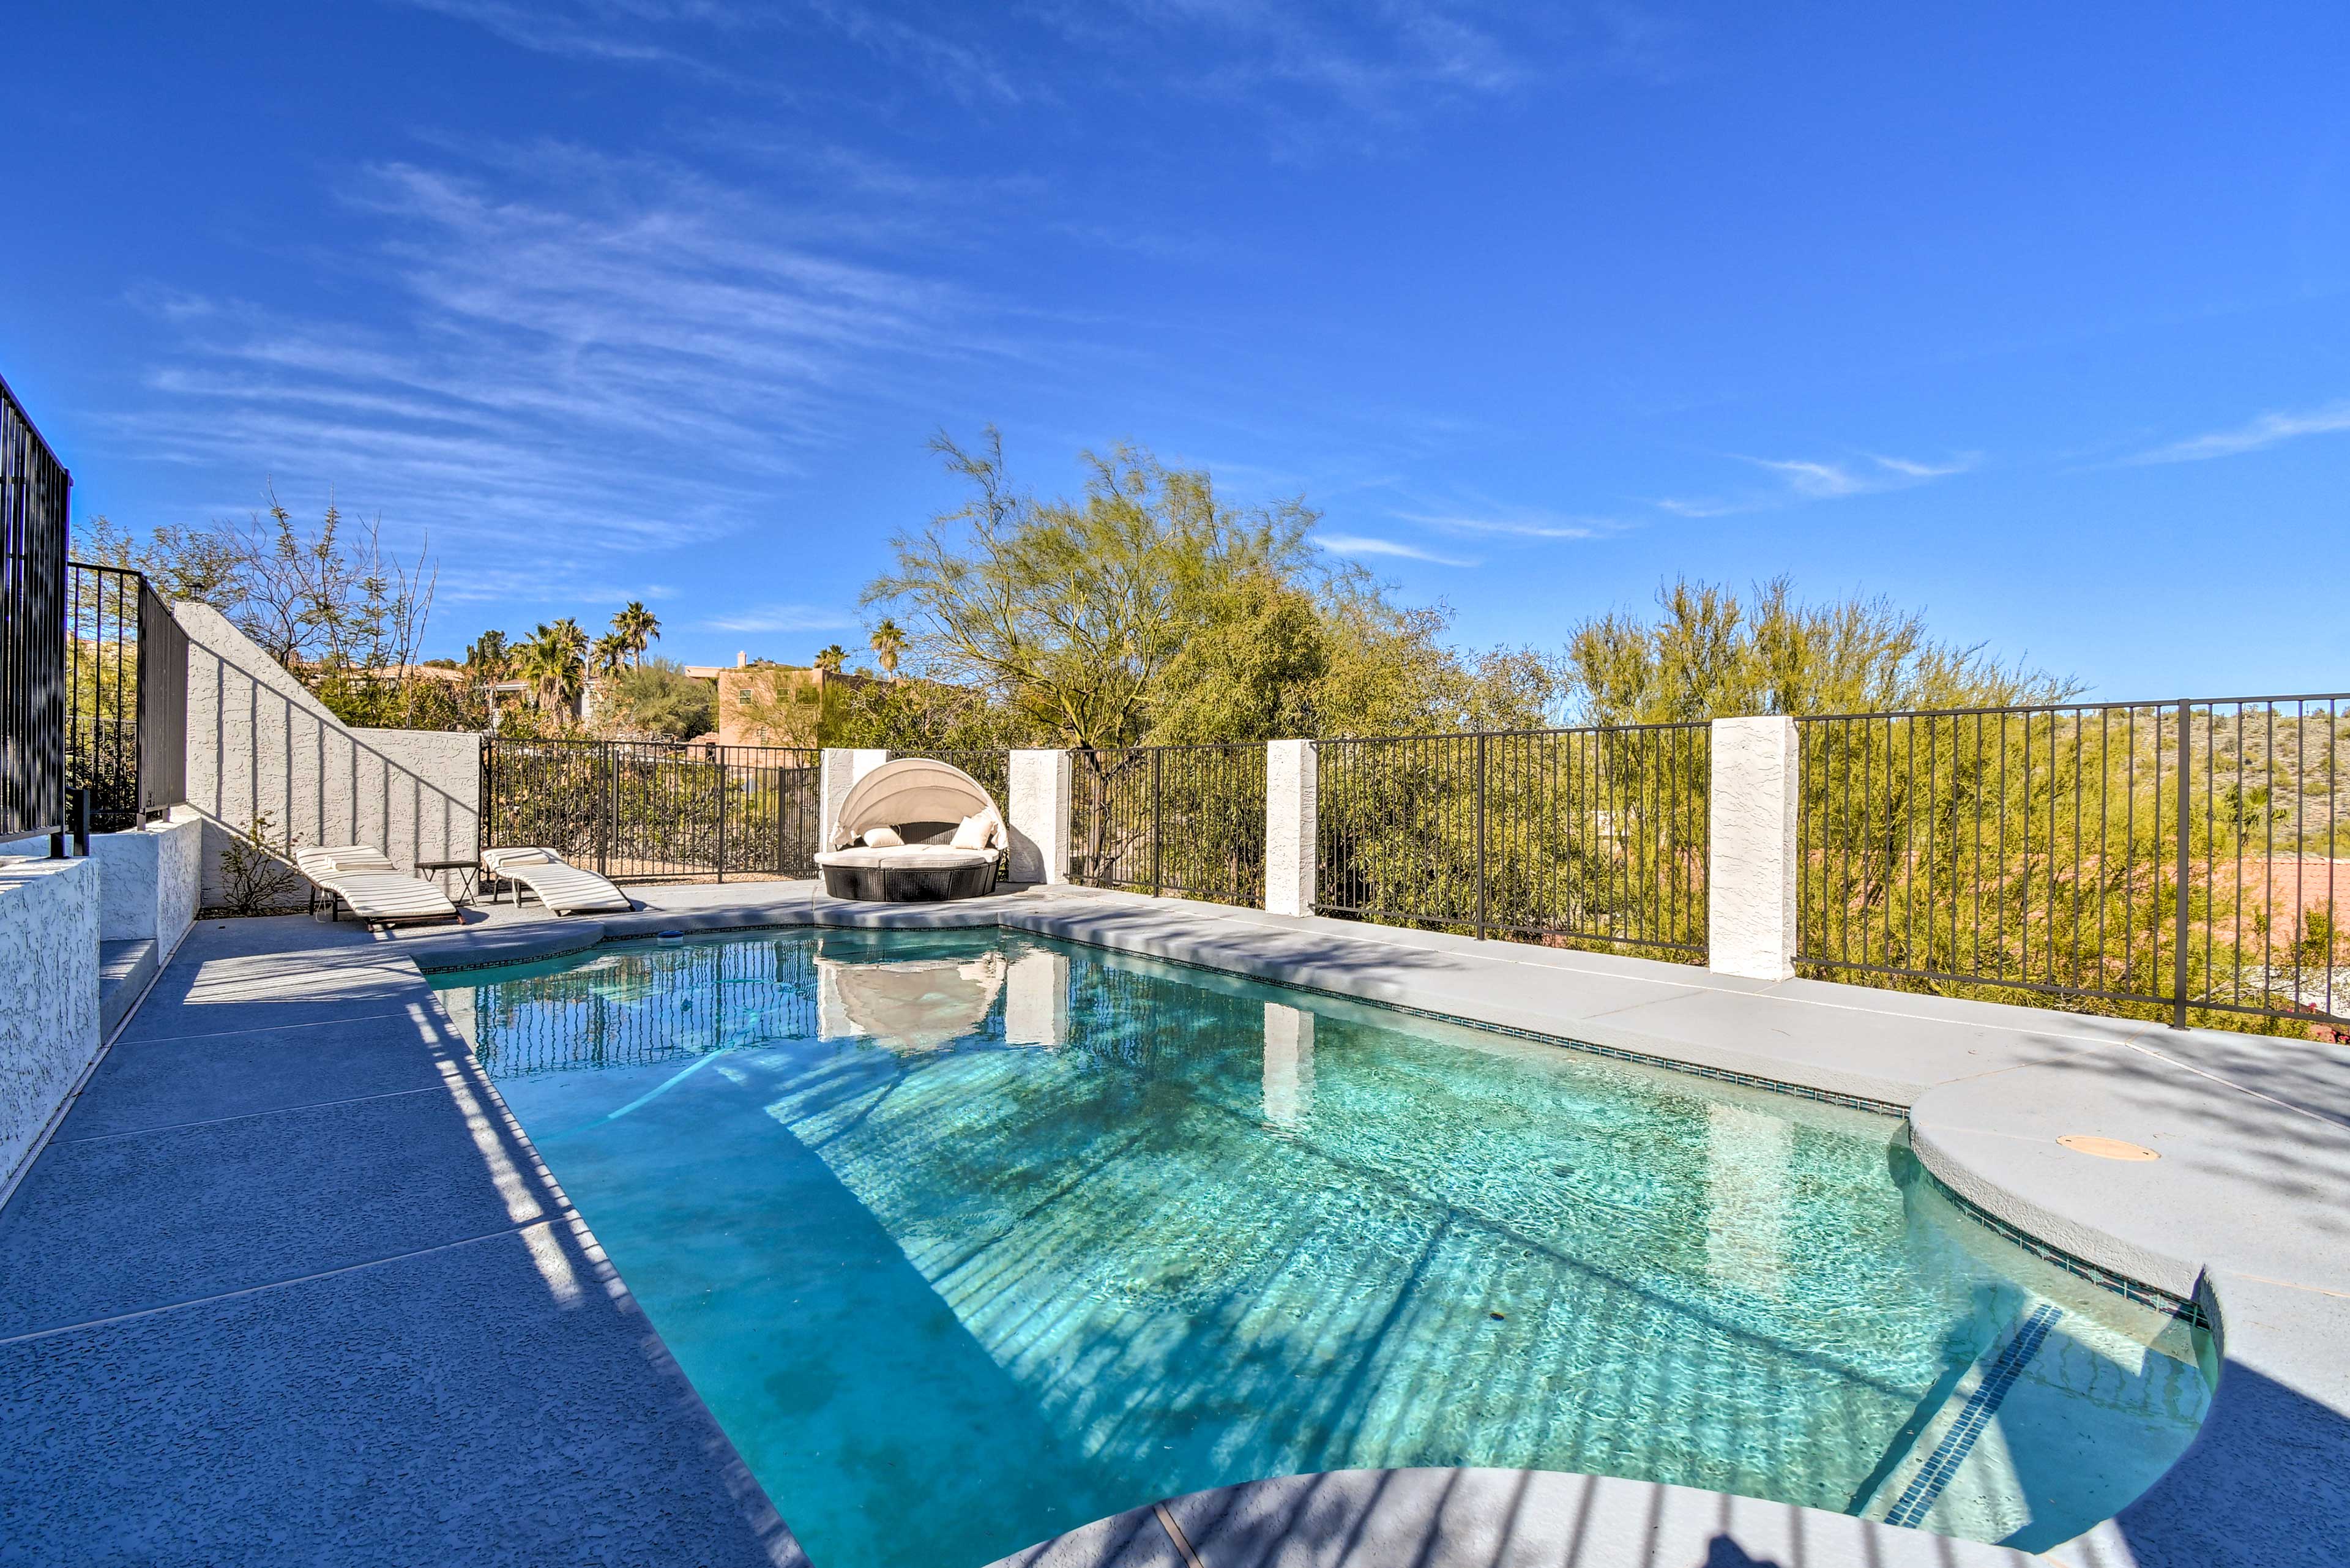 Pool Deck | Depth (3'-6') | Safety Fence | Mountain Views